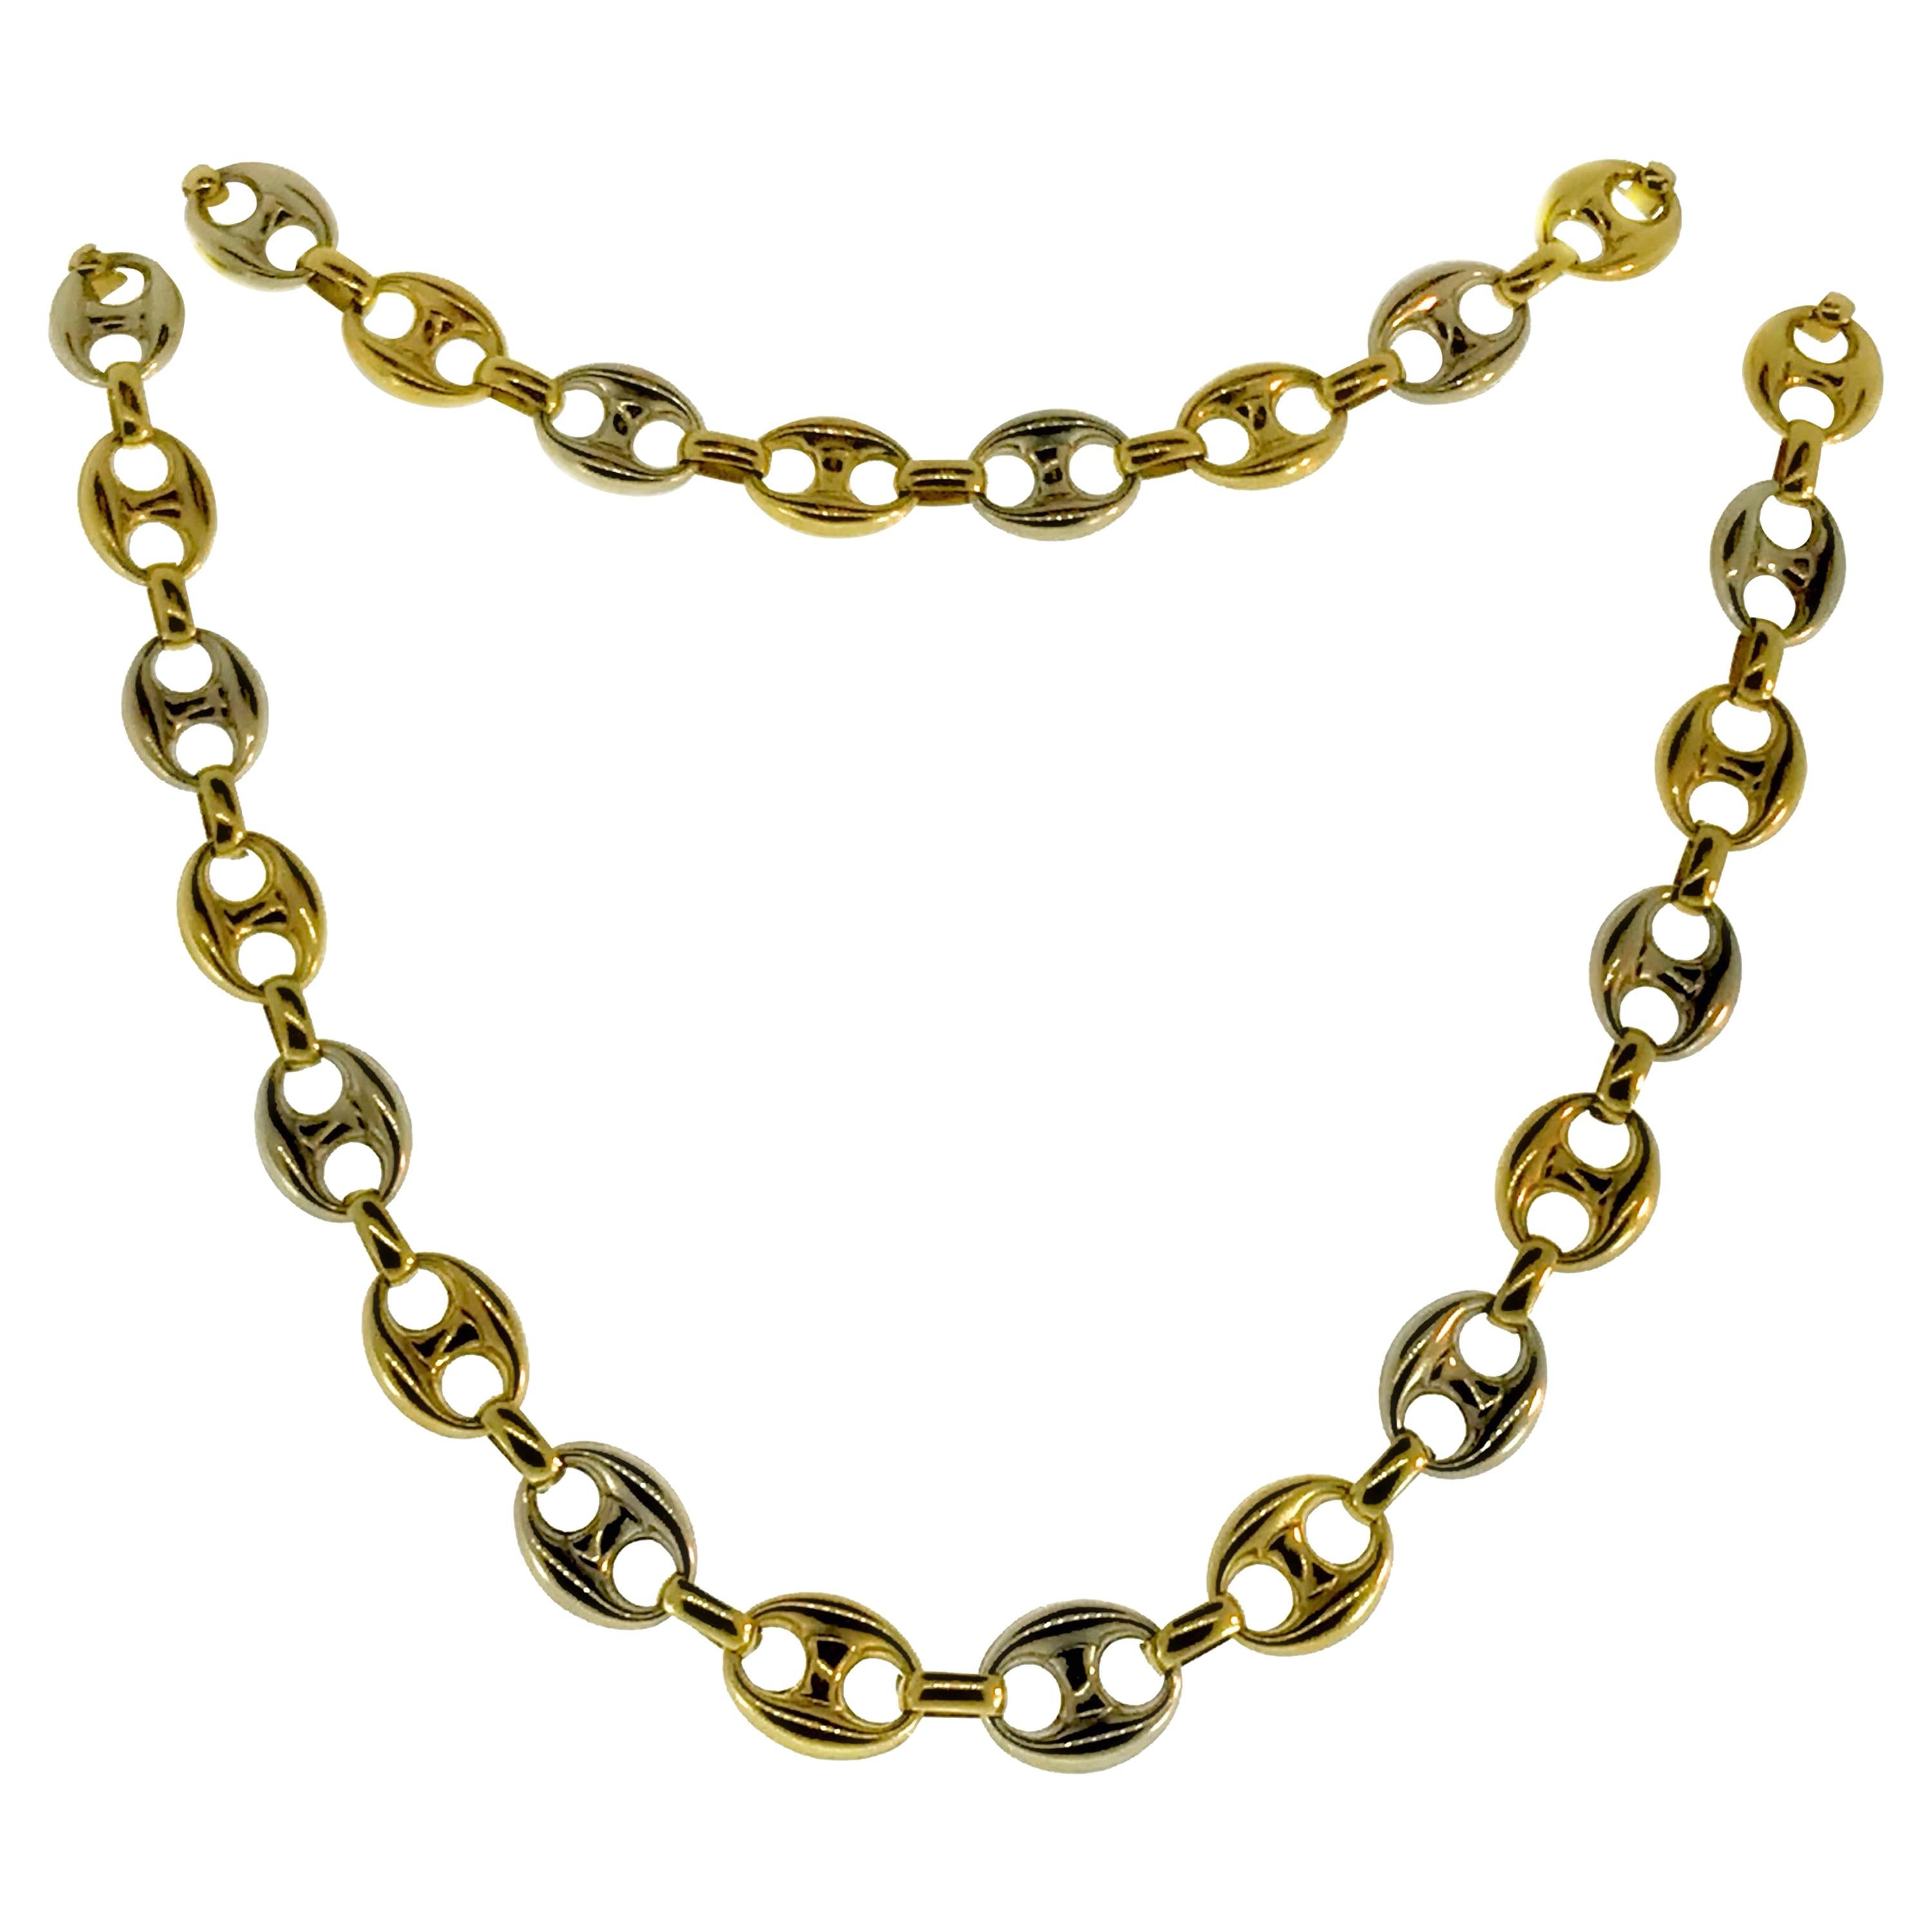 UnoAErre Two-Tone Gold Mariner Puffed Chain Necklace